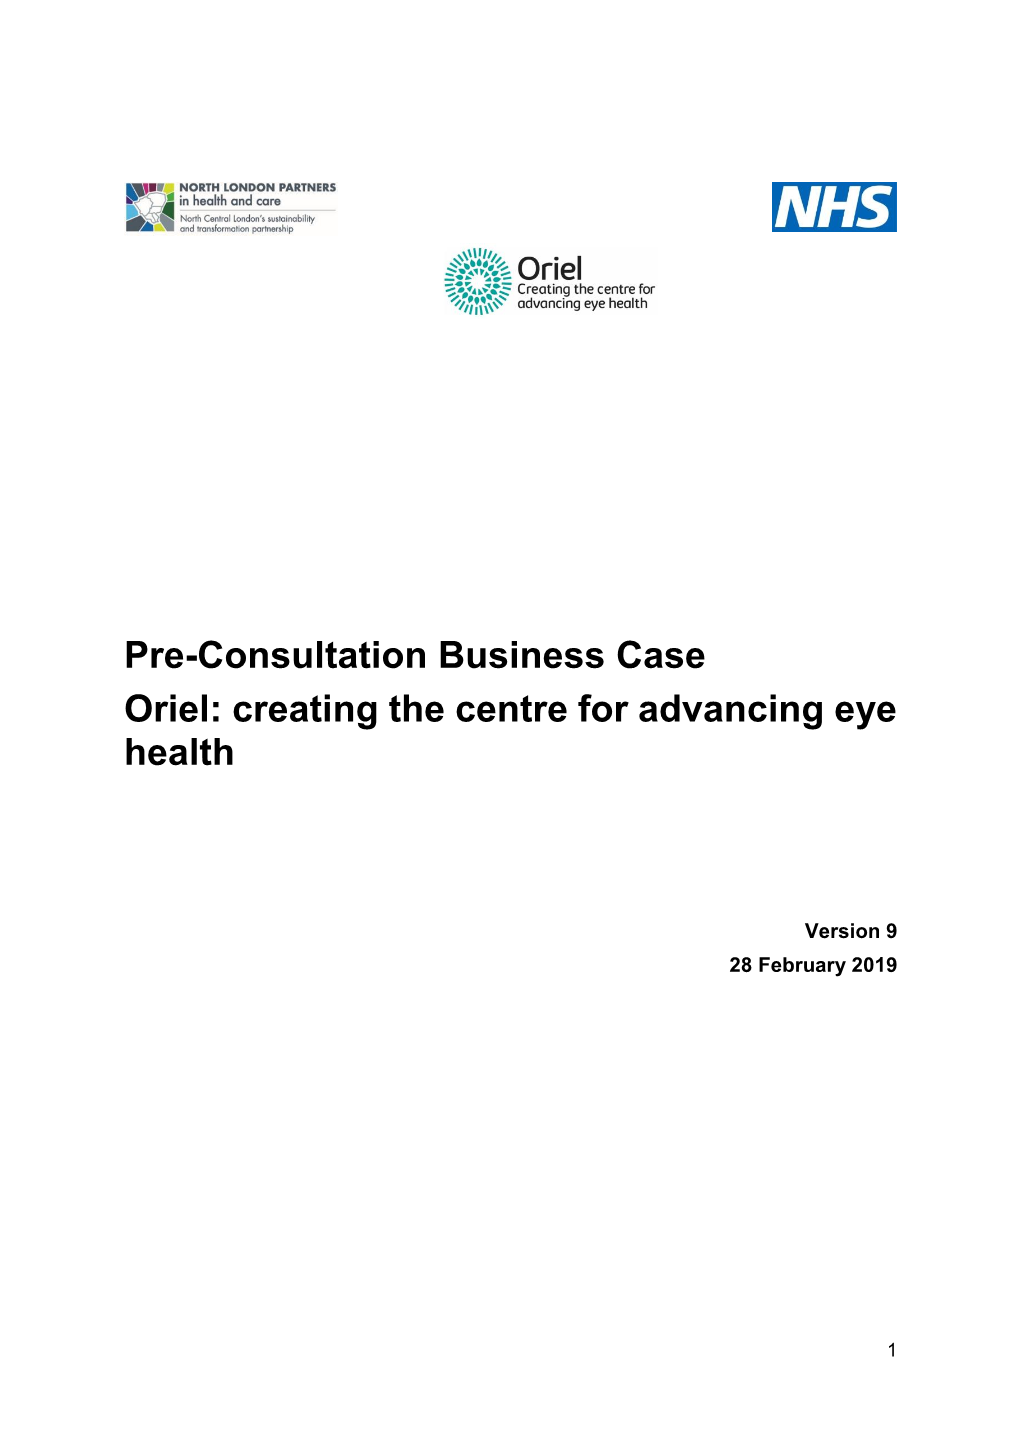 Pre-Consultation Business Case Oriel: Creating the Centre for Advancing Eye Health